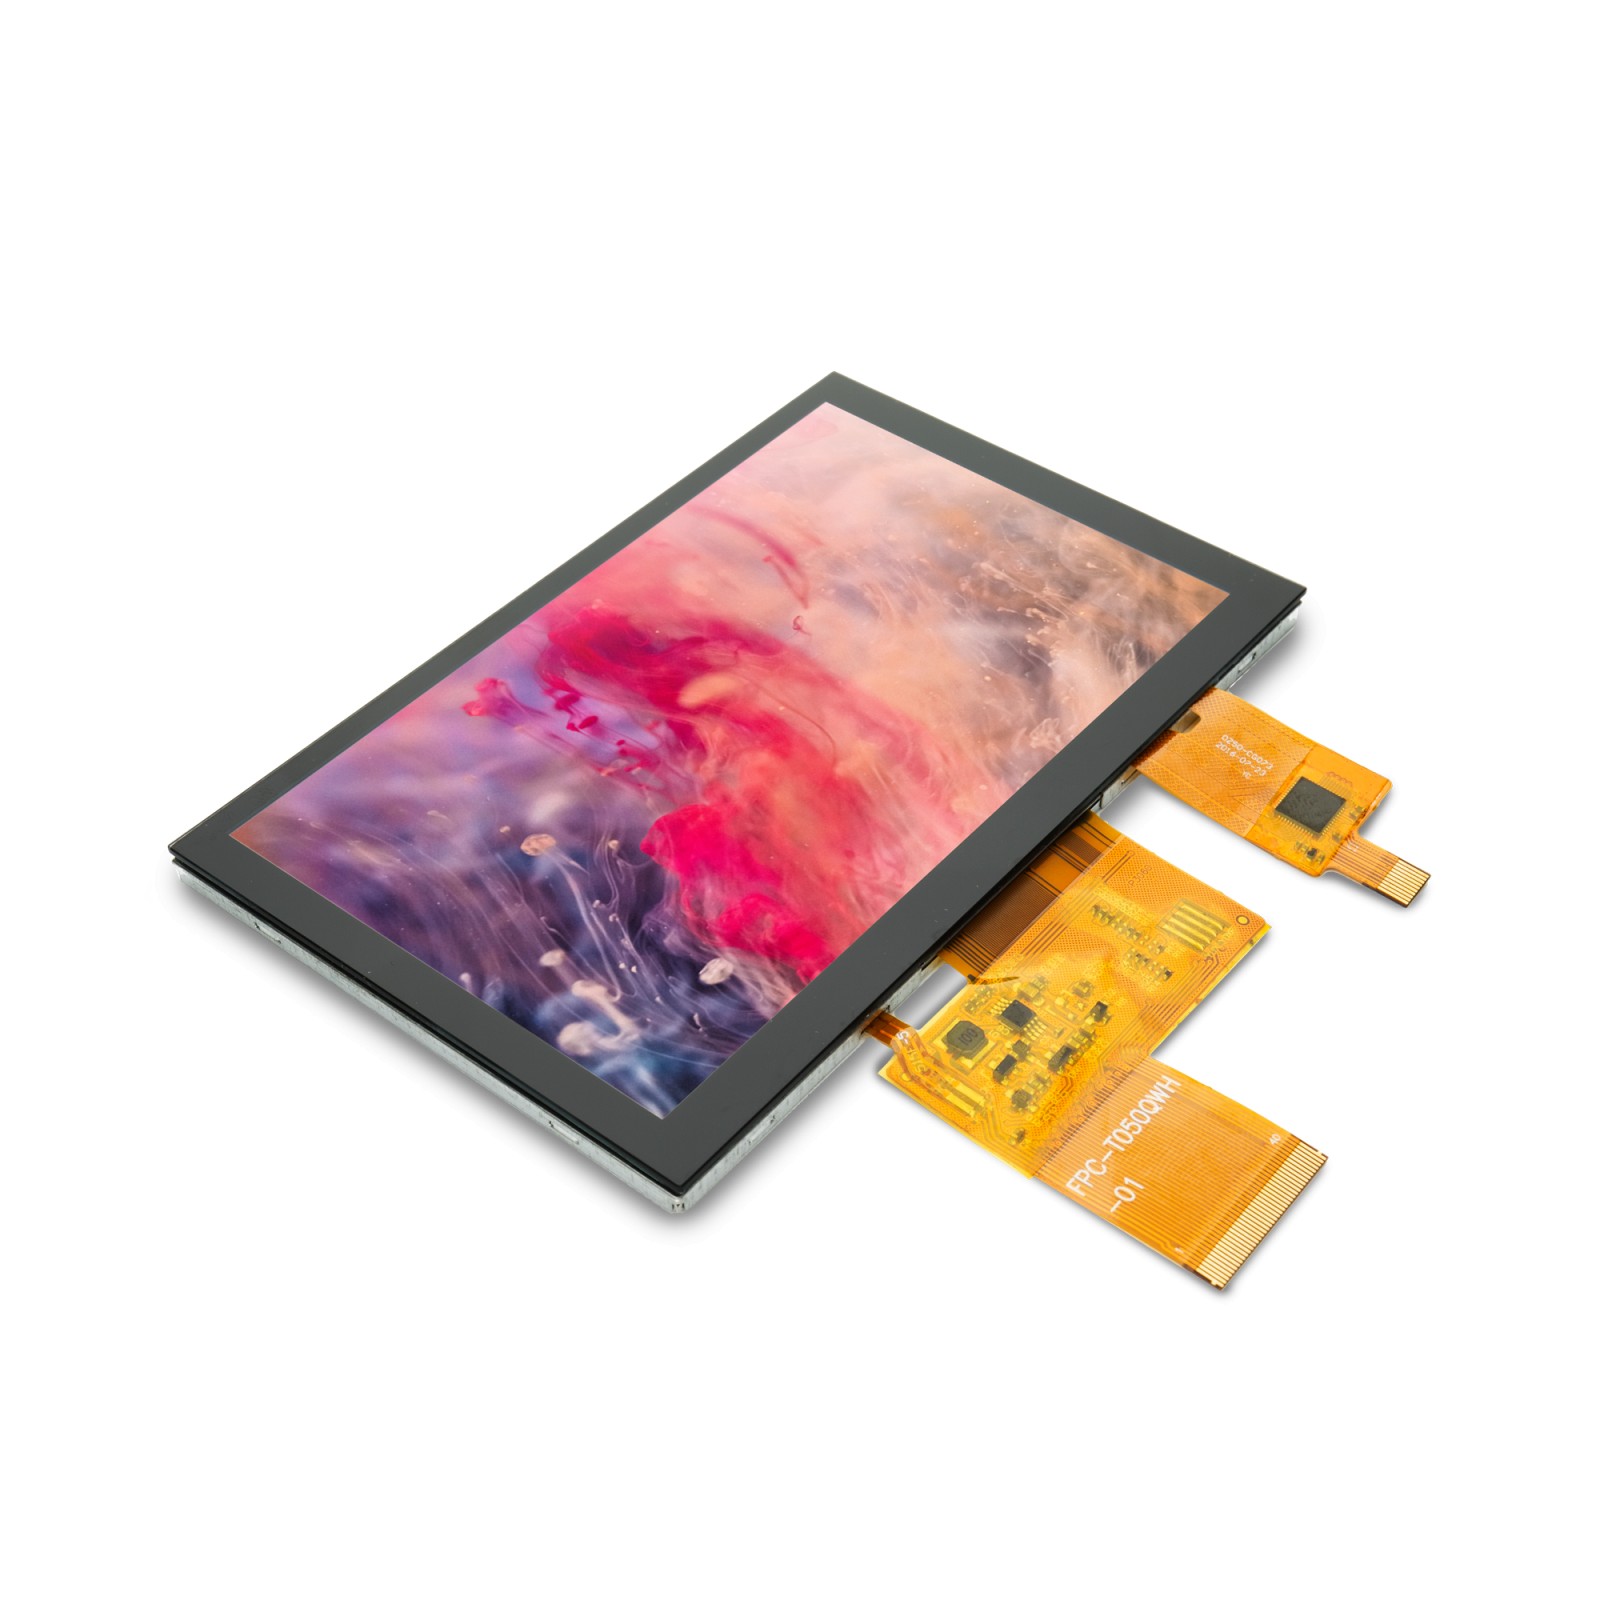 5" TFT Color Display w/ Capacitive Touch Screen